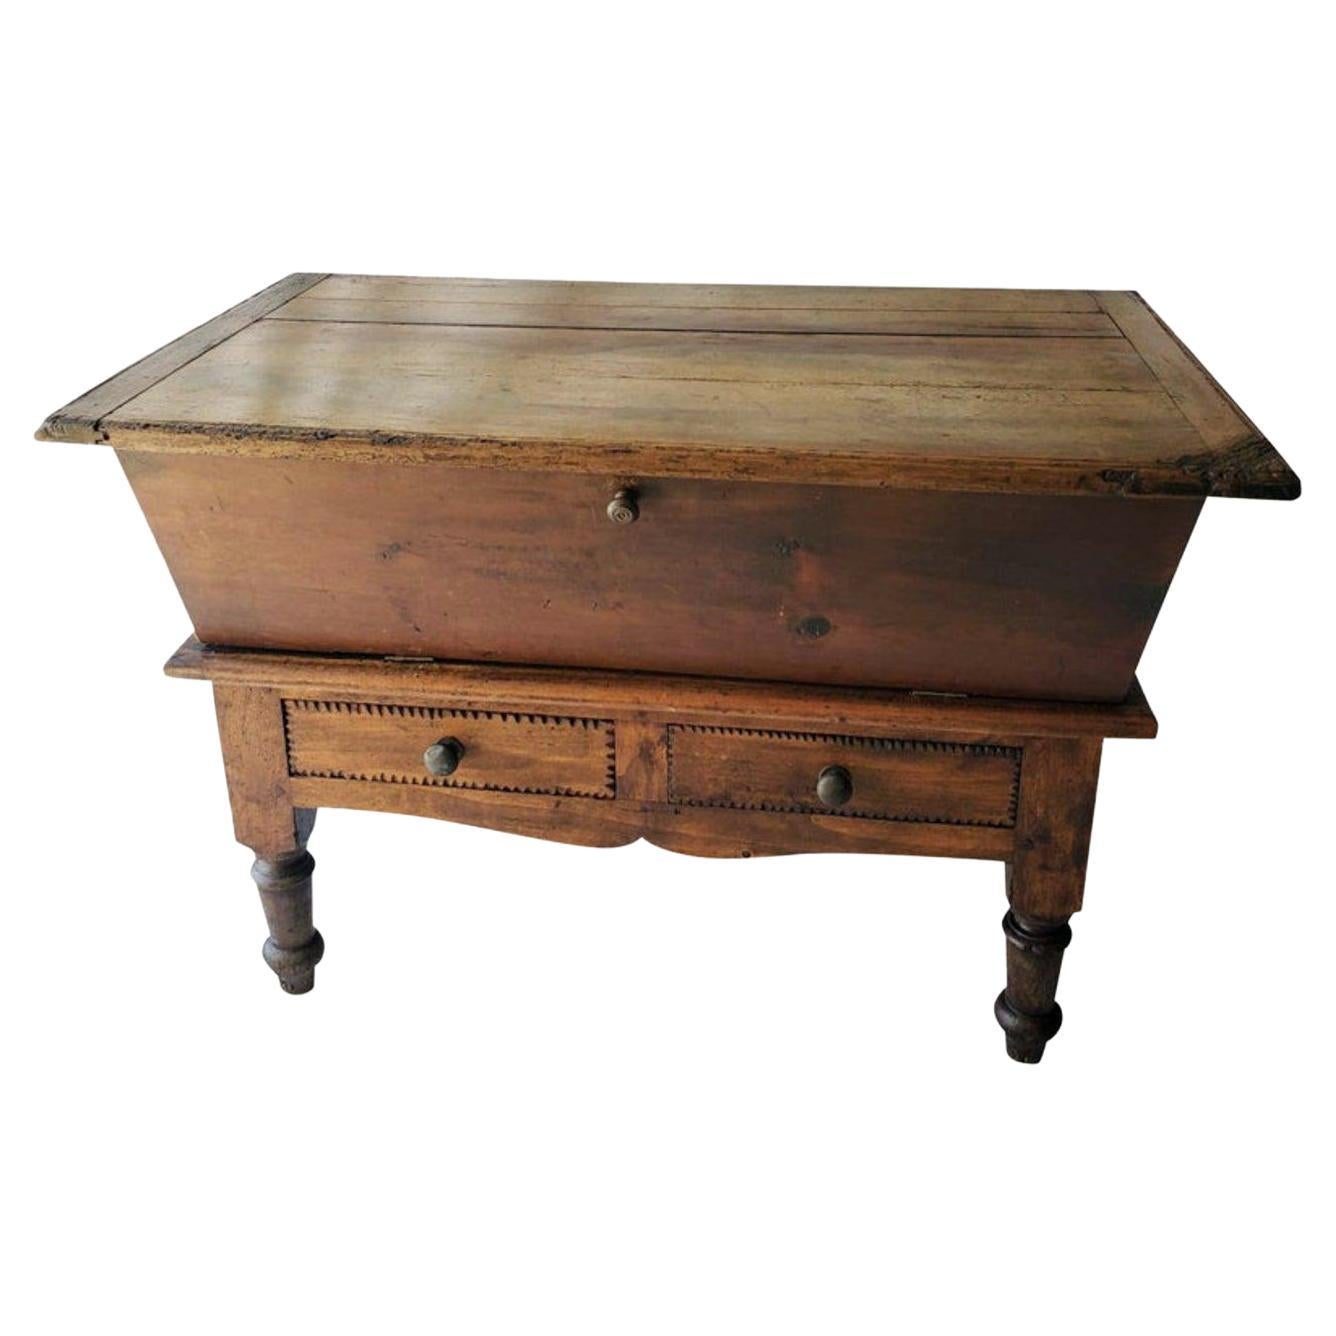 Early 19th Century French Provincial Boulangerie Bin on Carved Stand